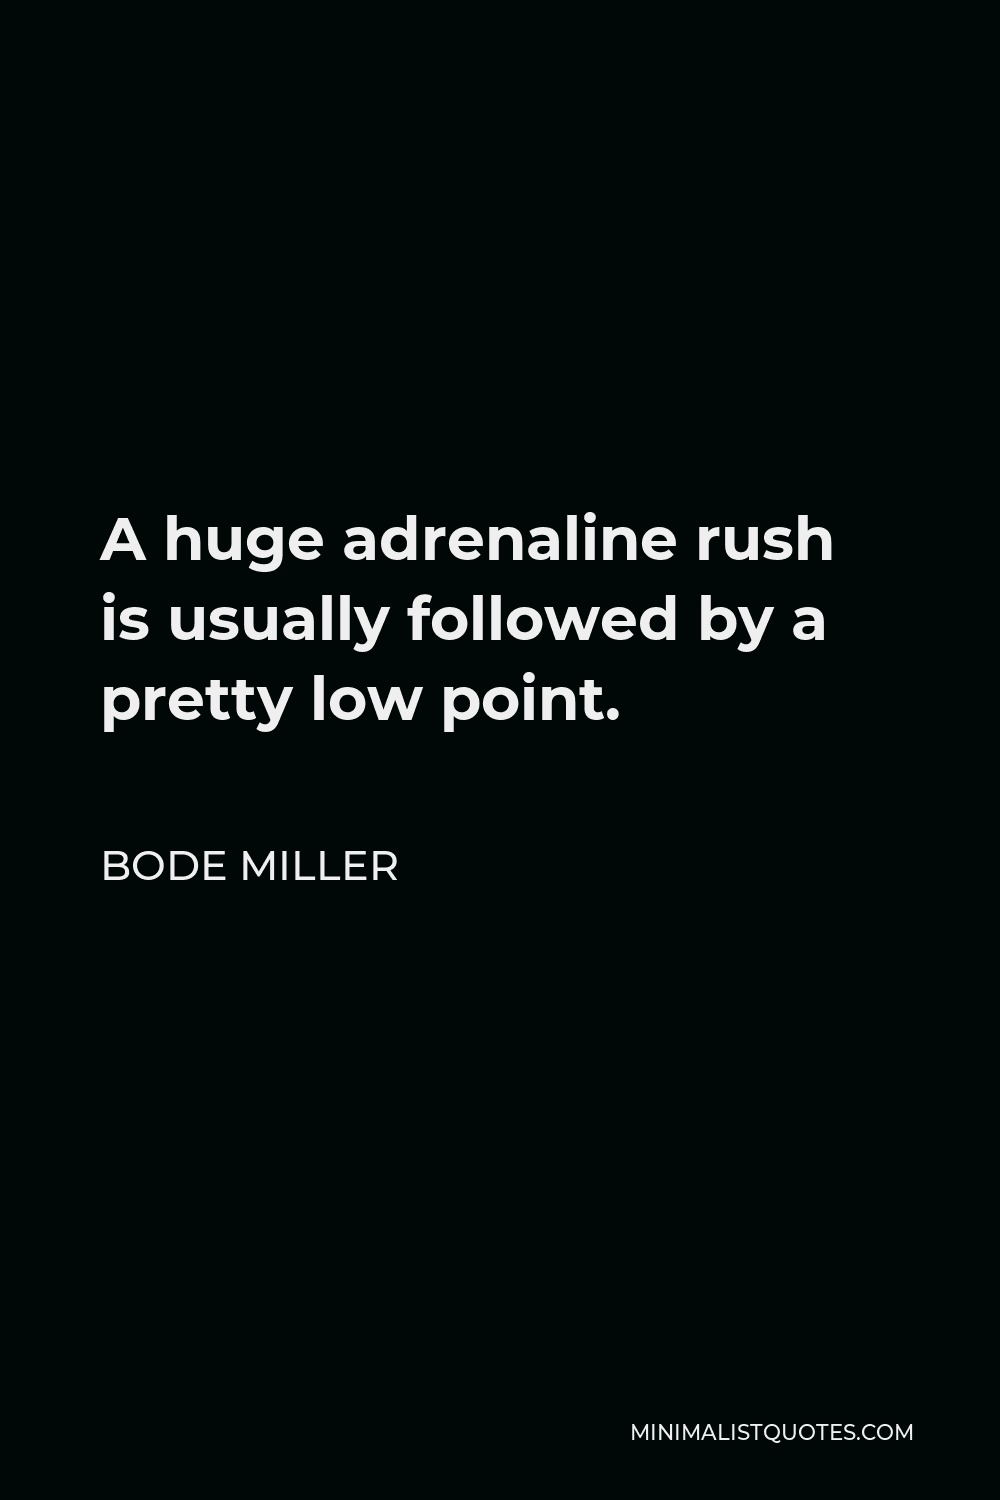 Bode Miller Quote: A huge adrenaline rush is usually followed by a ...